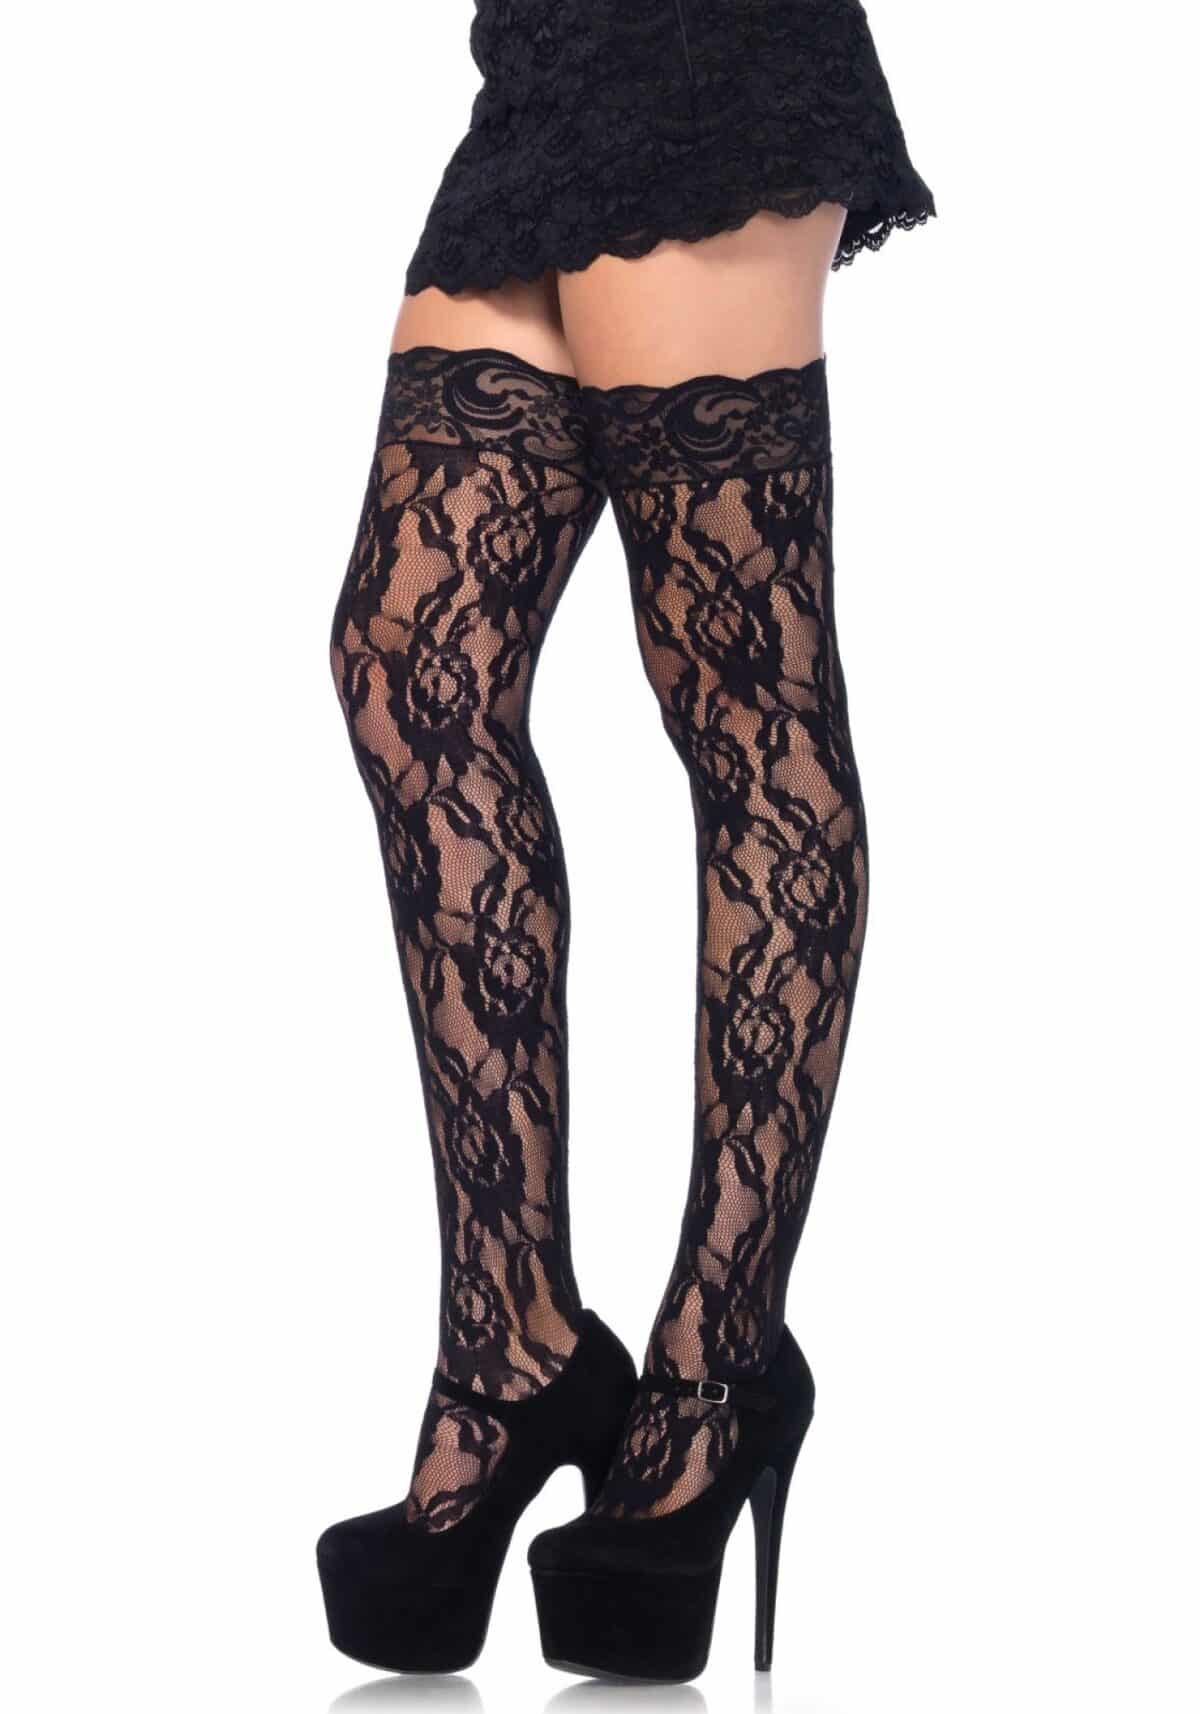 Rose Lace Stockings κάλτσες με δαντέλα